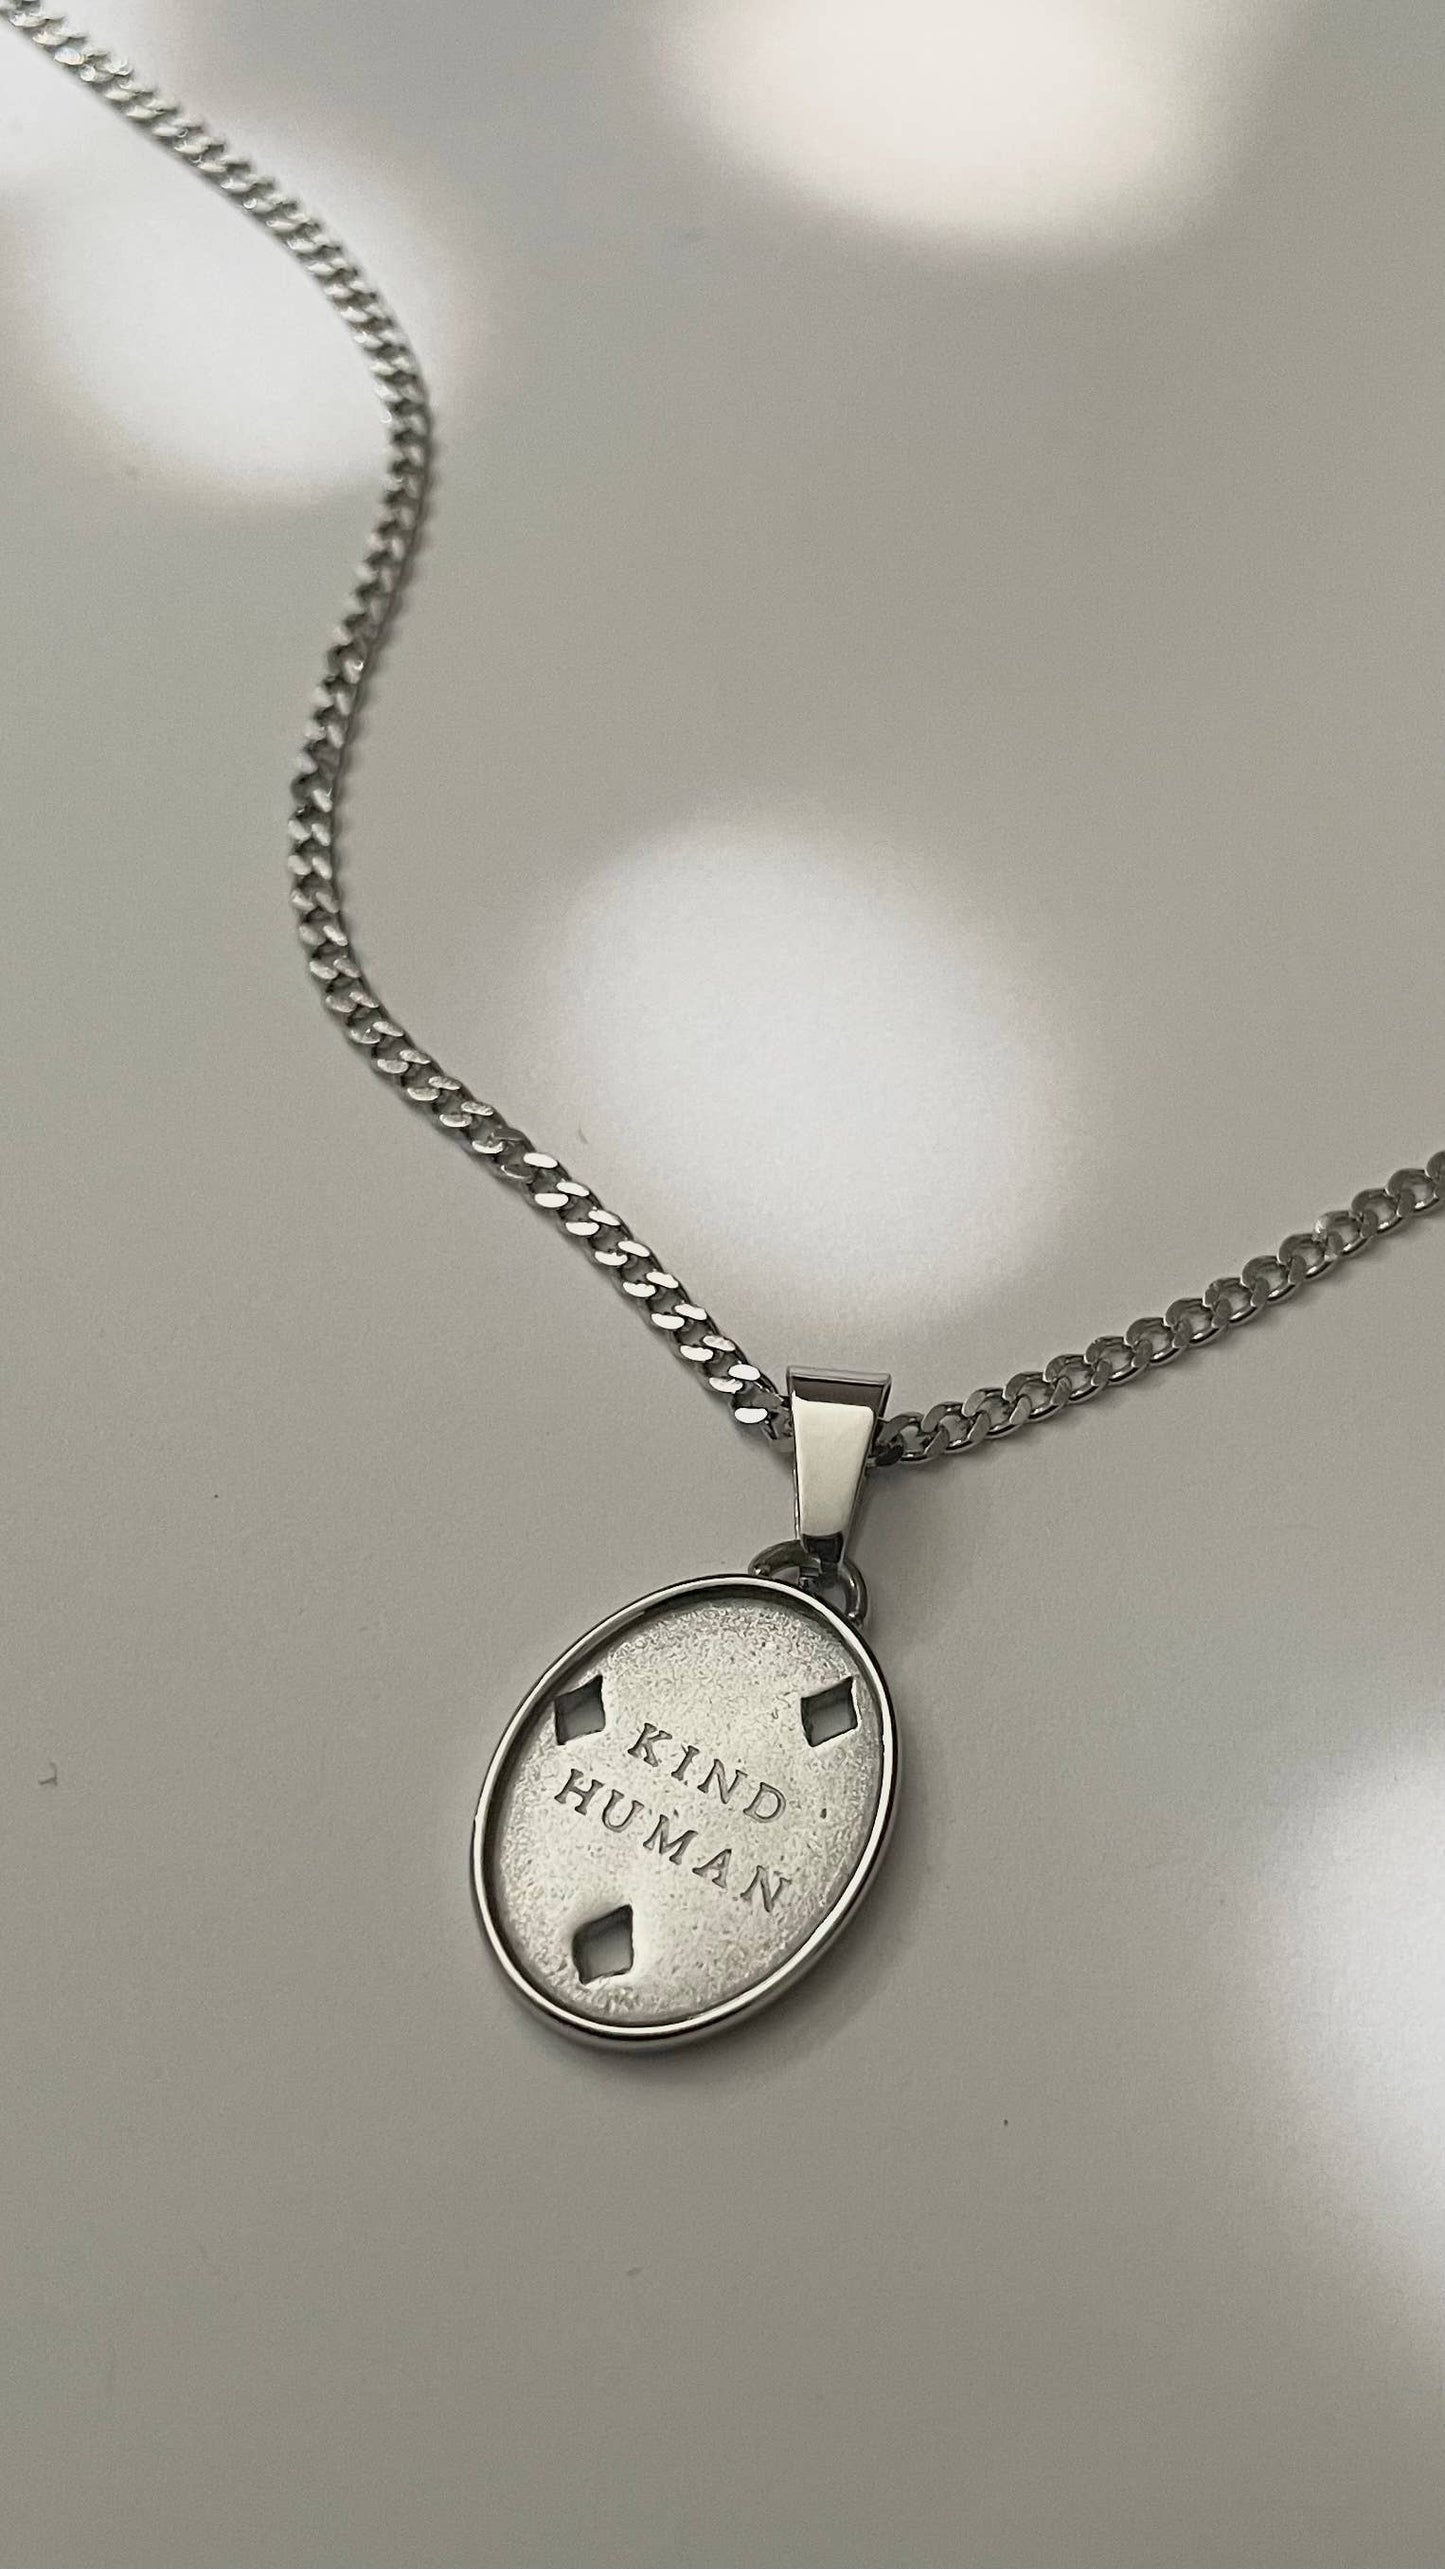 Namaste Jewelry - Kind Human Necklace- Silver - Thrice Exceptional